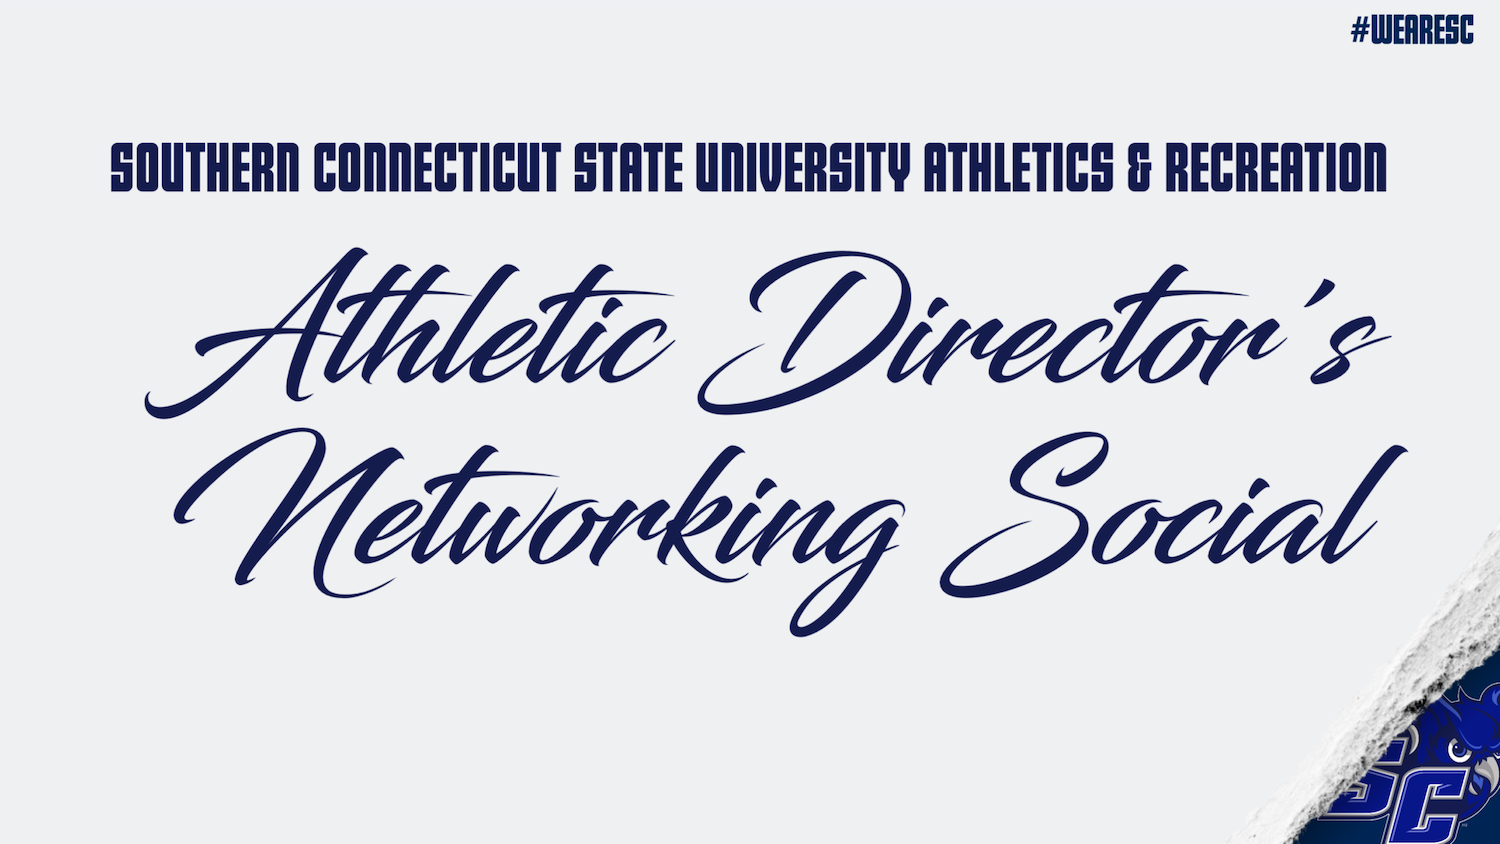 "SCSU 2nd Athletic Director's Networking Social flyer